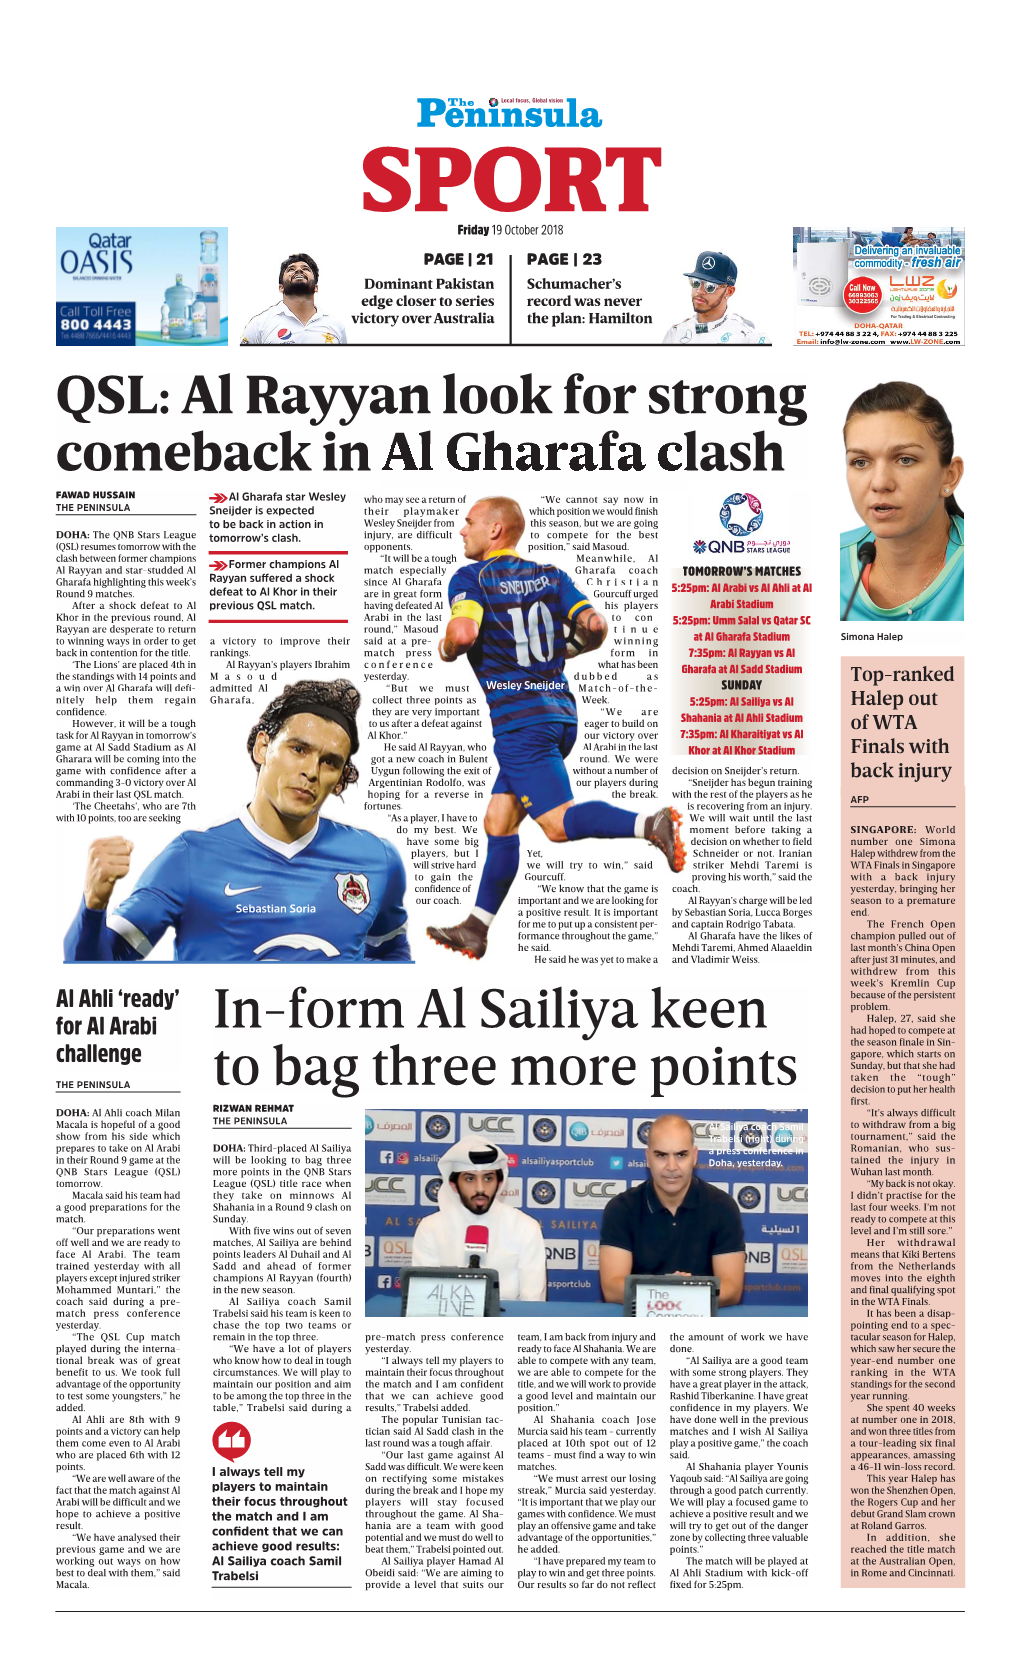 In-Form Al Sailiya Keen to Bag Three More Points